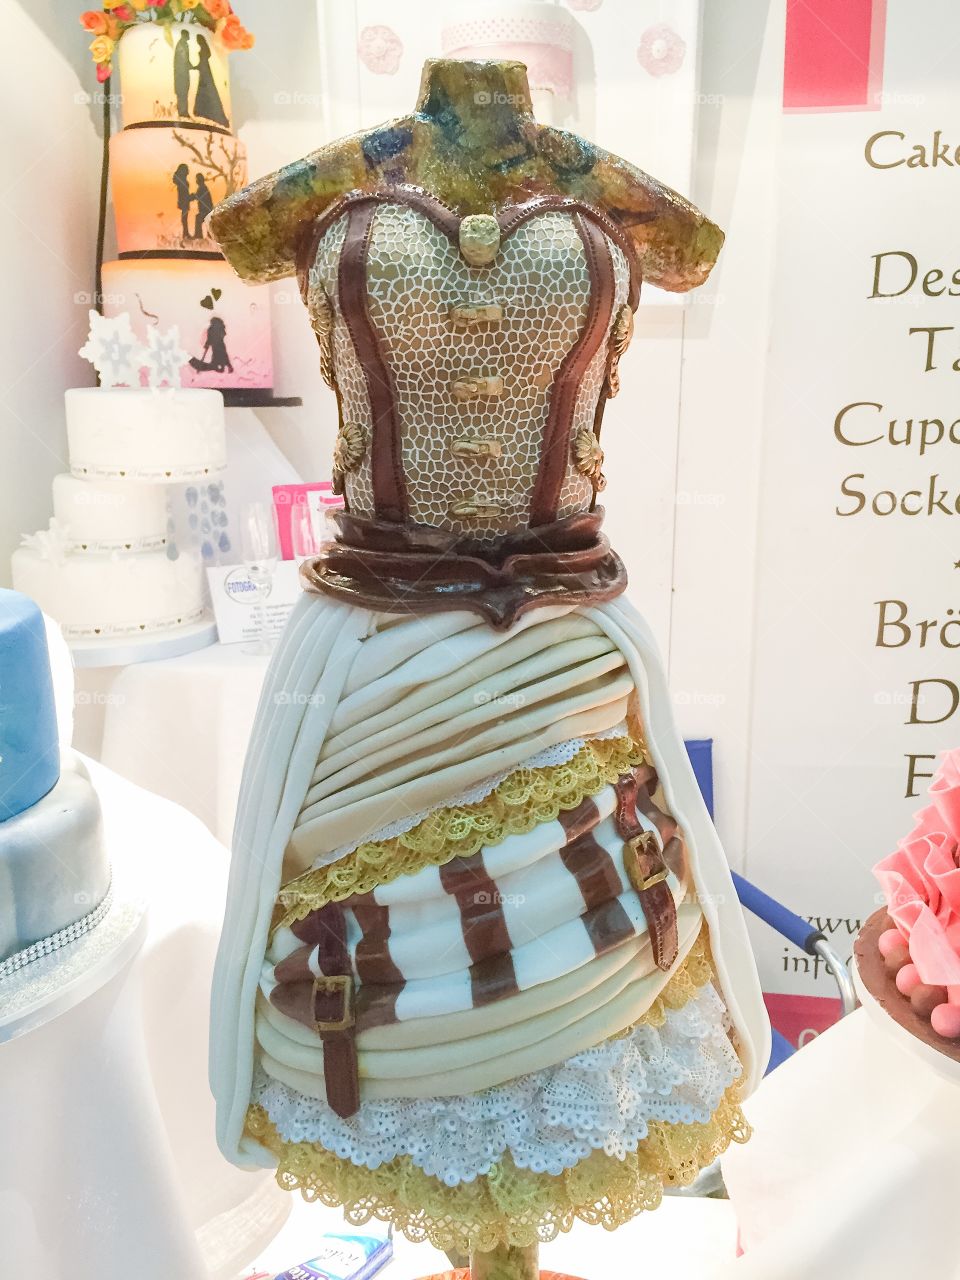 A very different weddingcake in the shape of a dress.